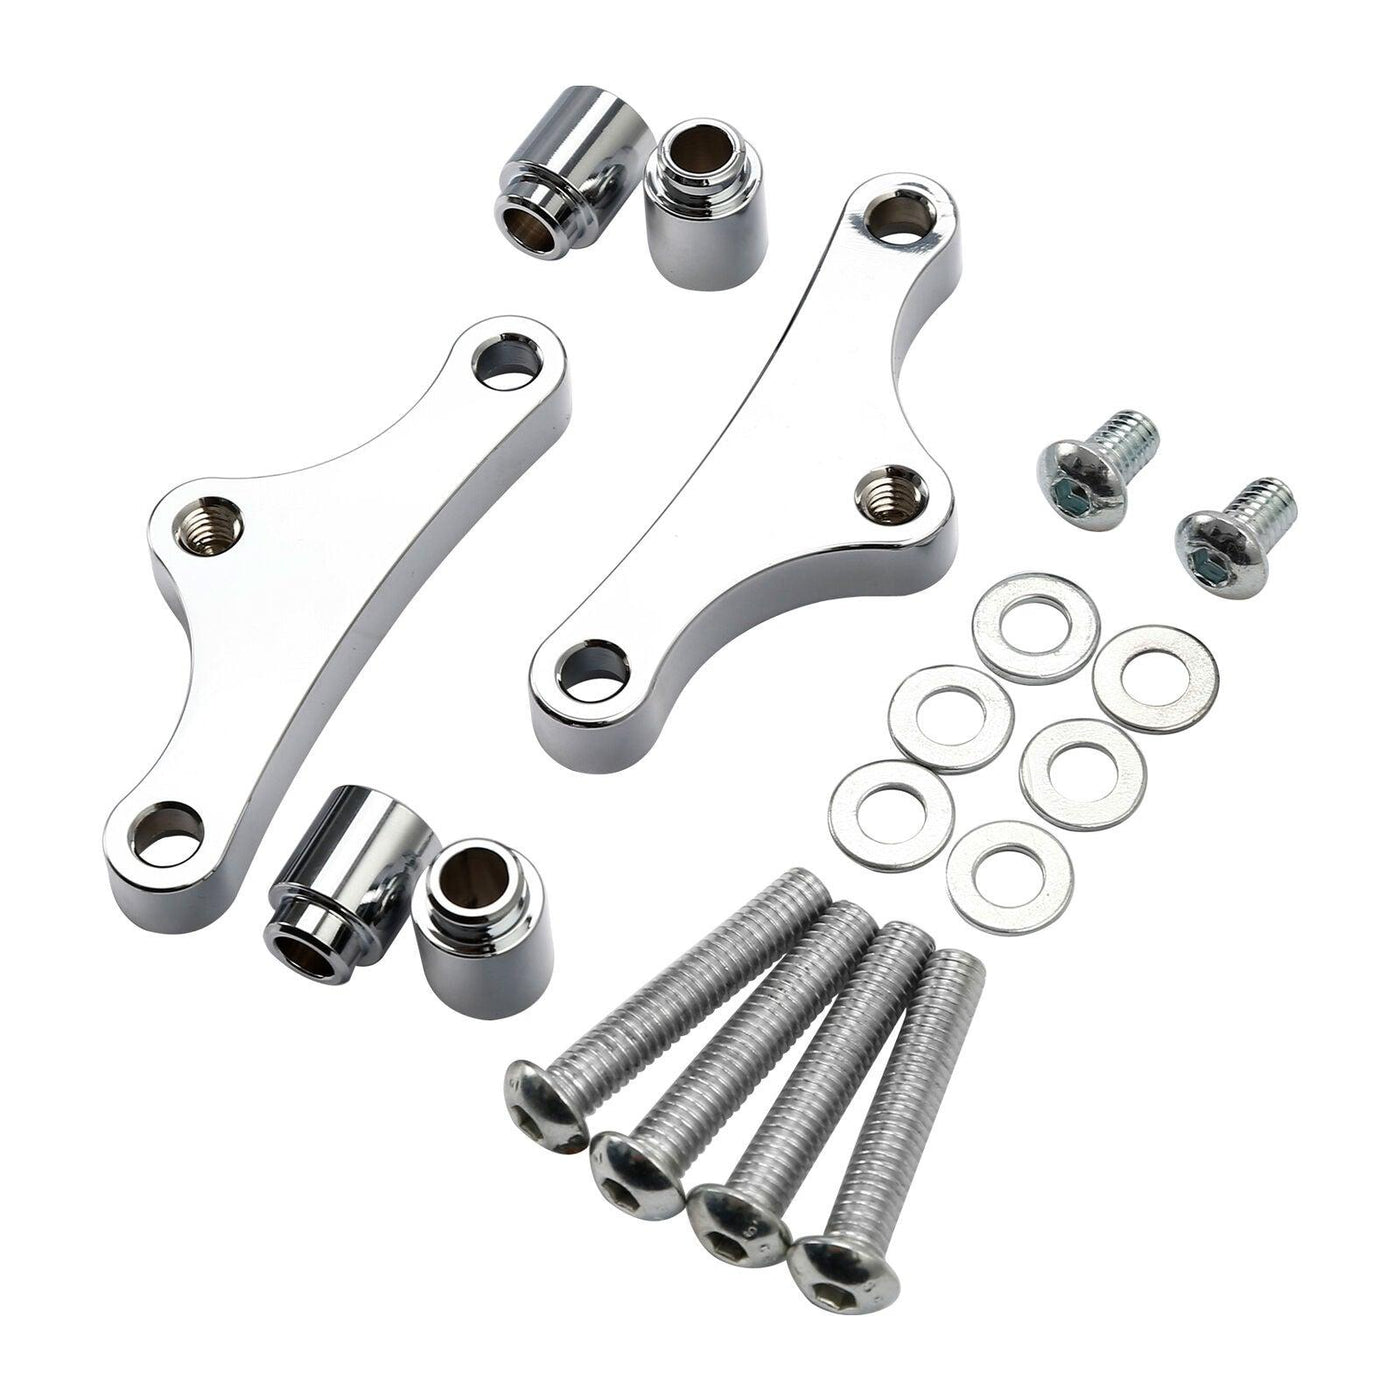 Chrome Fender Mounting Brackets Kit Fit For Harley Touring Electra Glide 00-13 - Moto Life Products